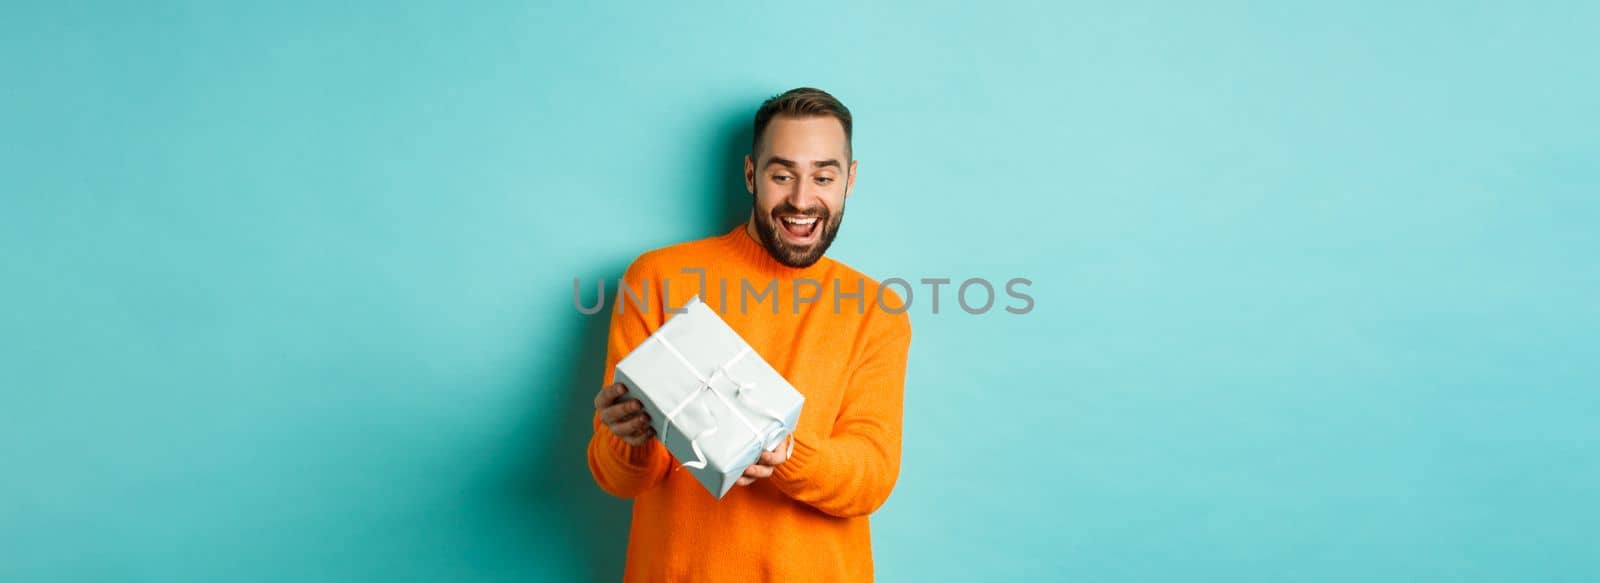 Holidays and celebration concept. Excited man receiving gift, looking happy at present and smiling, standing over blue background.